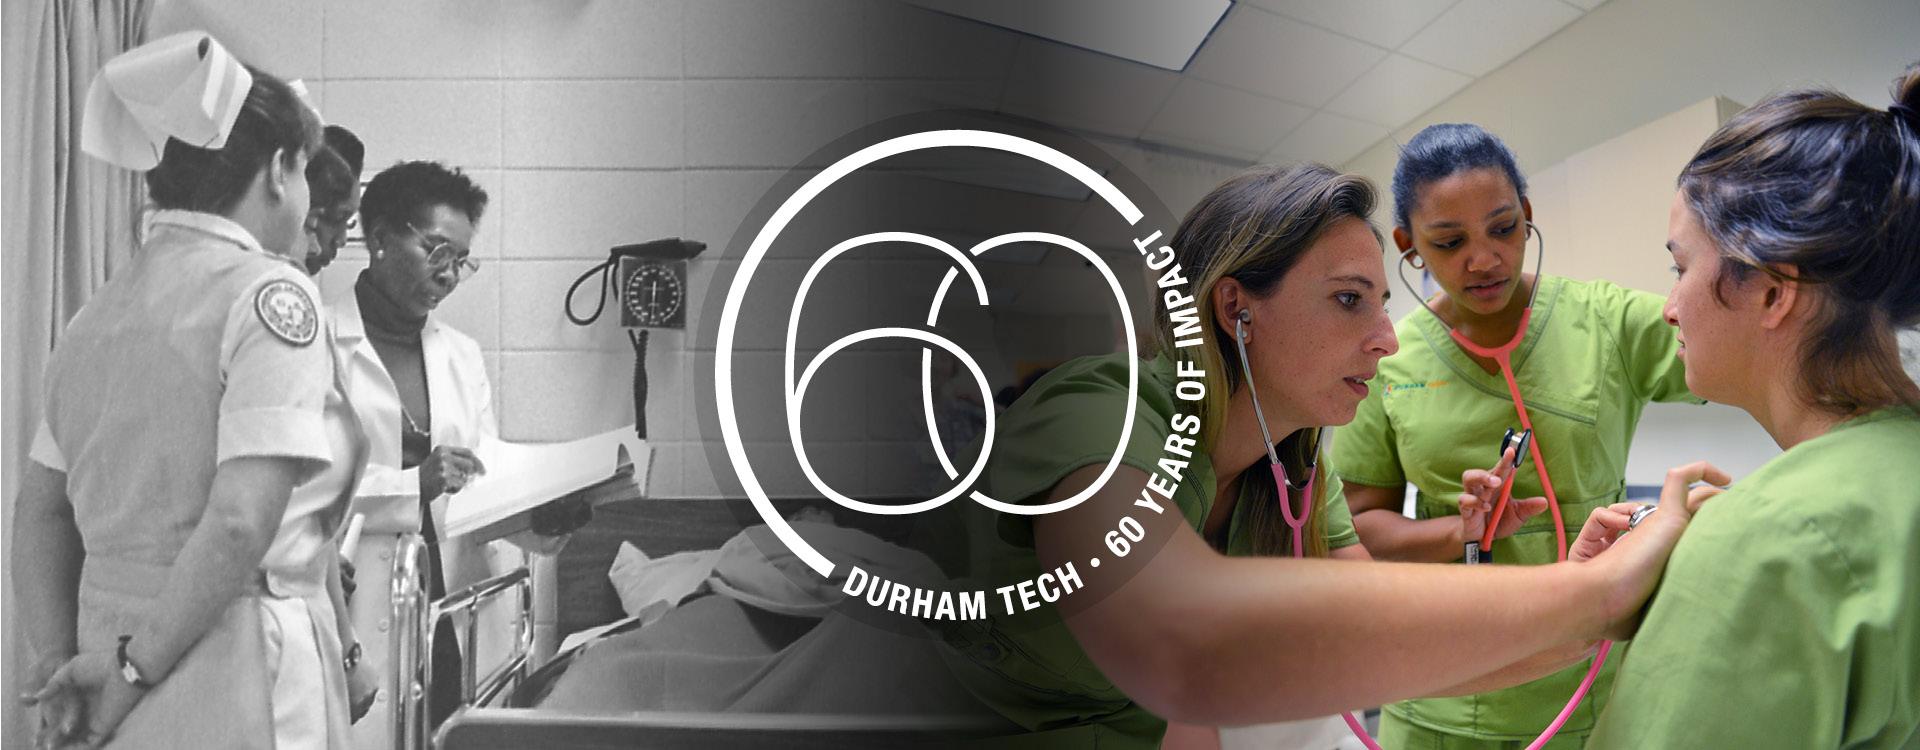 60th anniversary logo with historical and modern images of nursing students 